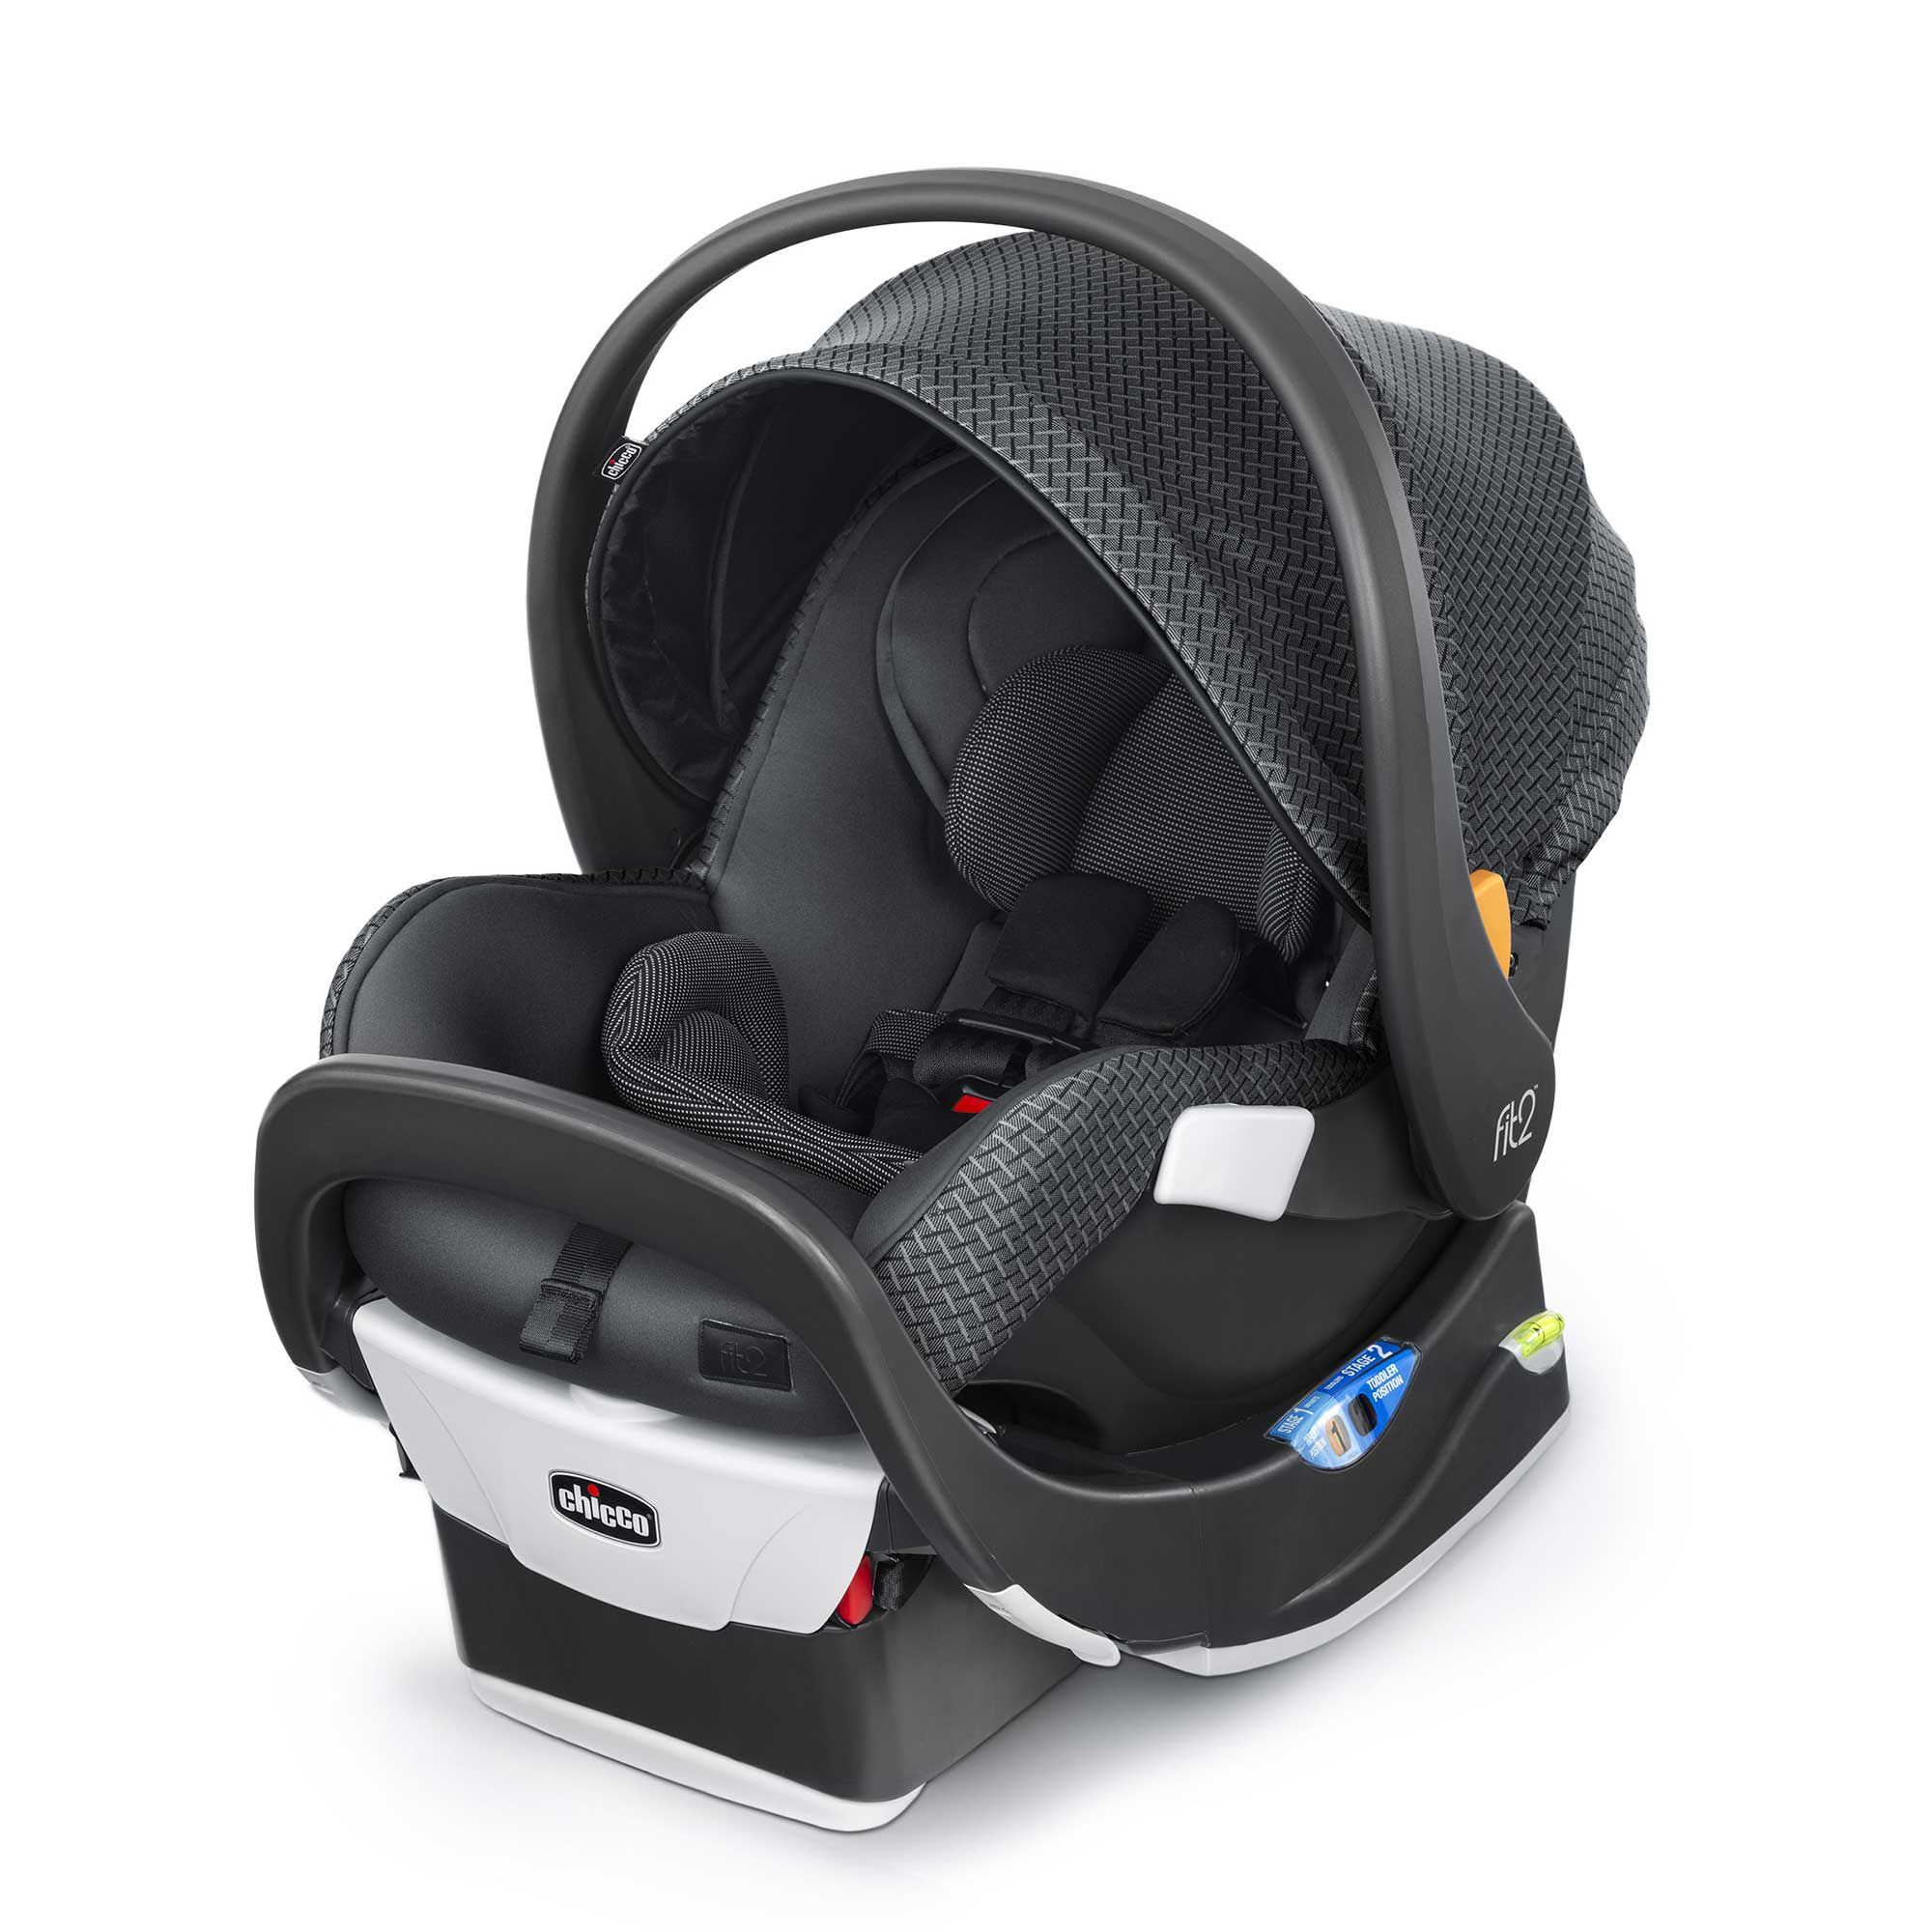 How Long Should You Use A Rear Facing Car Seat | tunersread.com